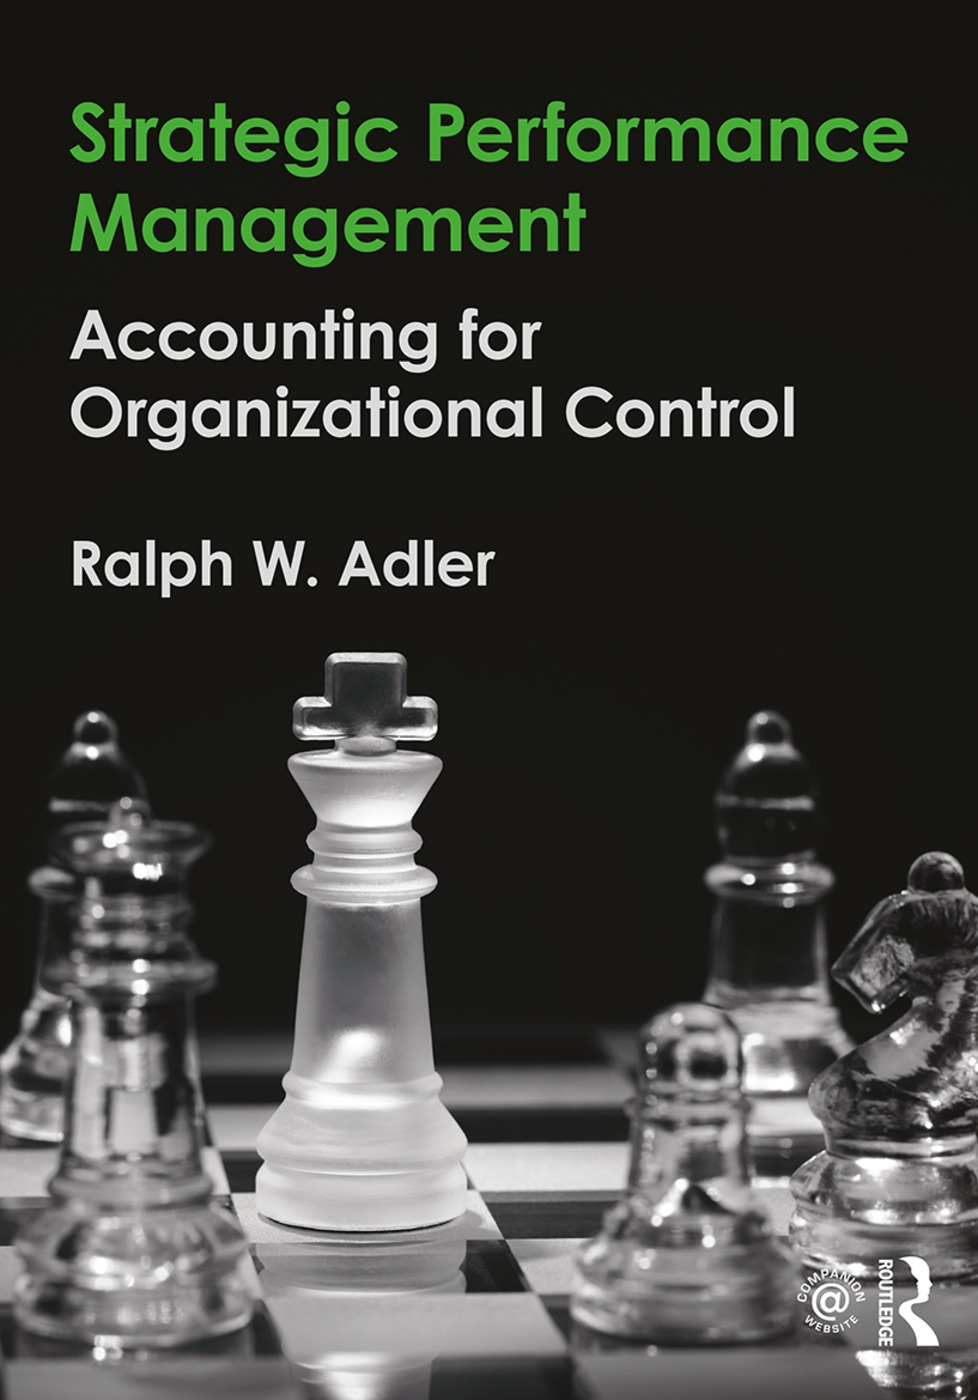 Strategic Performance Management: Accounting for Organizational Control